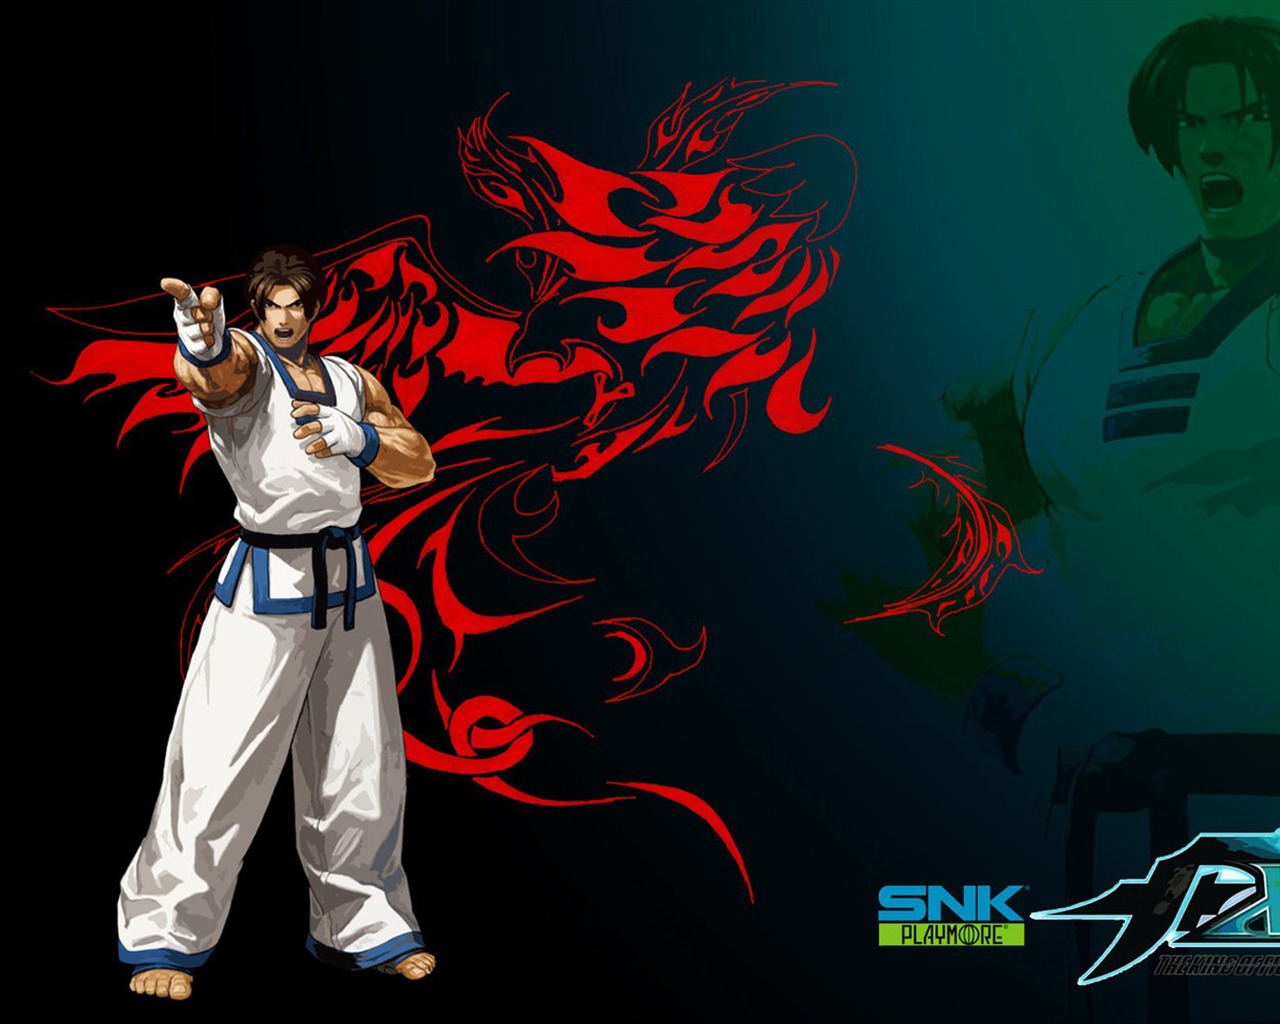 Le roi de wallpapers Fighters XIII #14 - 1280x1024